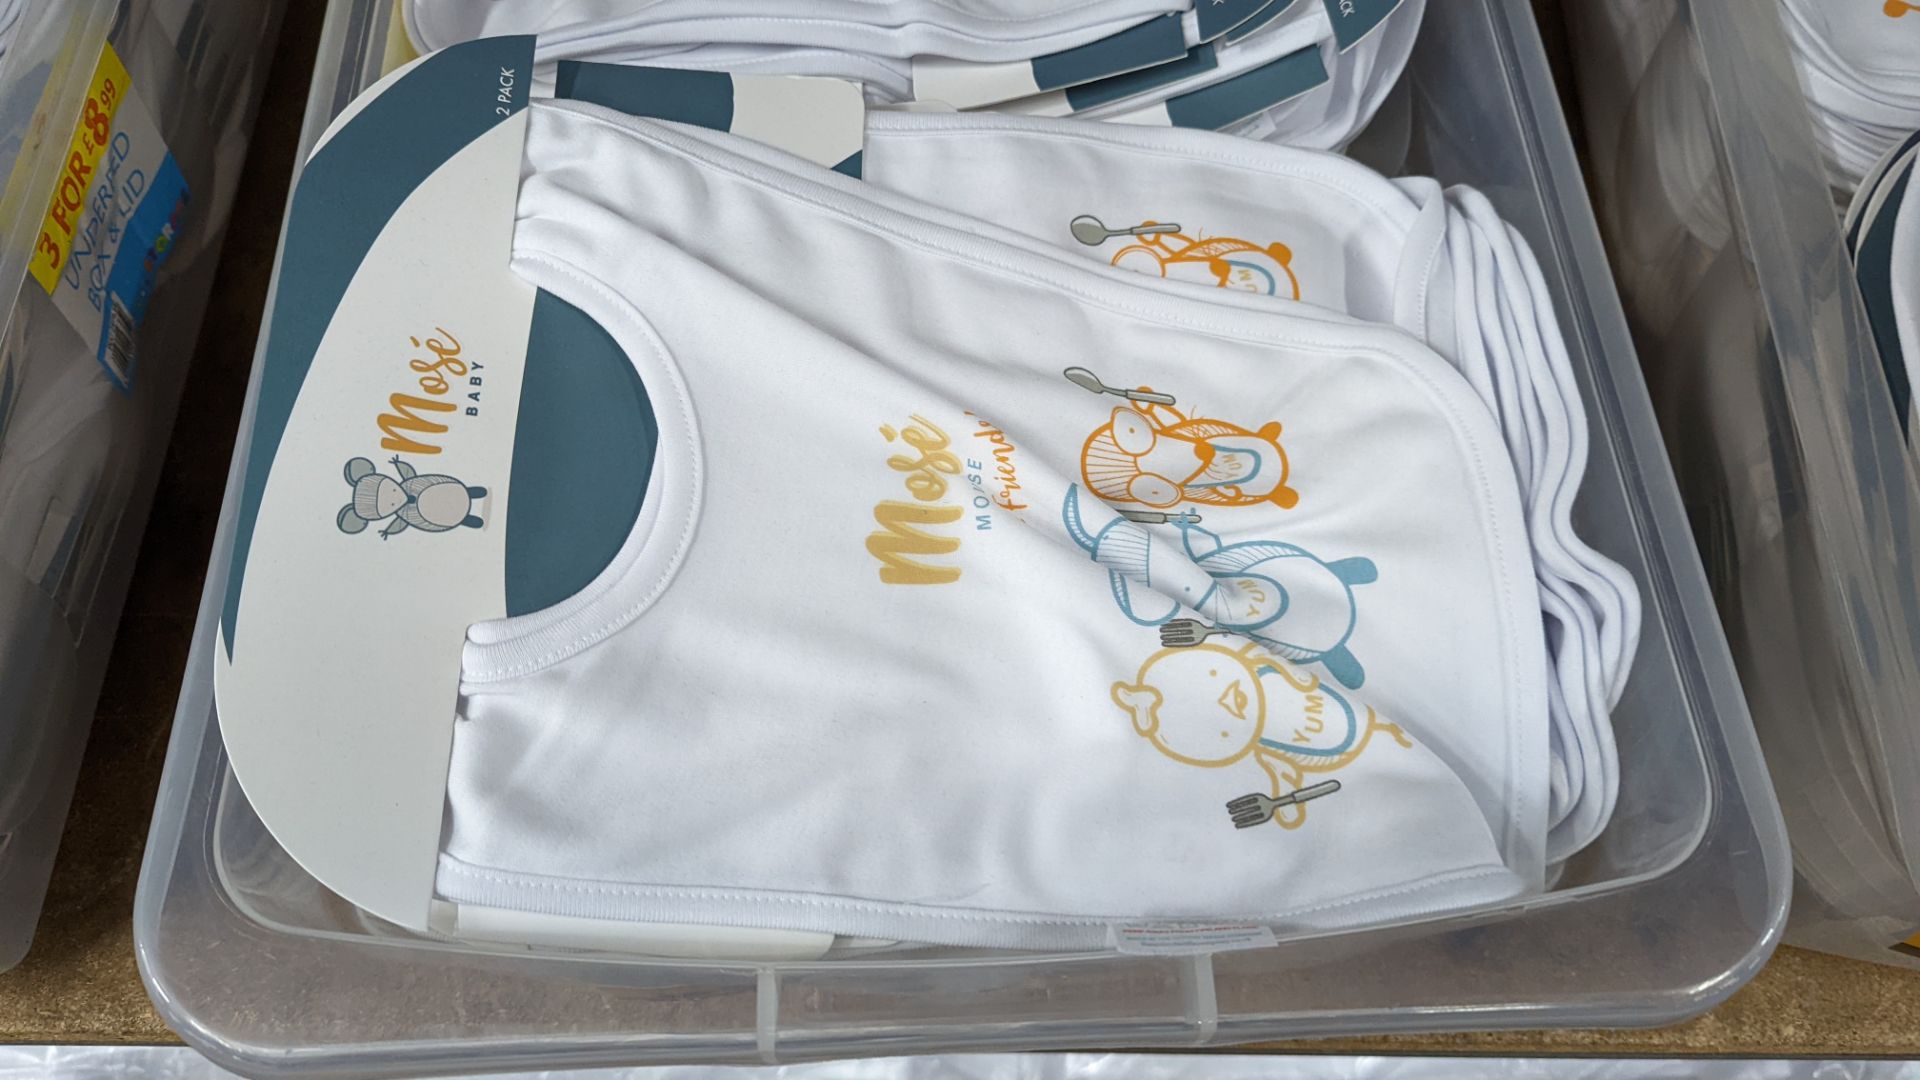 55 off Mosé Baby bibs twin packs. Retail price £10 per twin pack. Each twin pack comprises one pla - Image 3 of 5